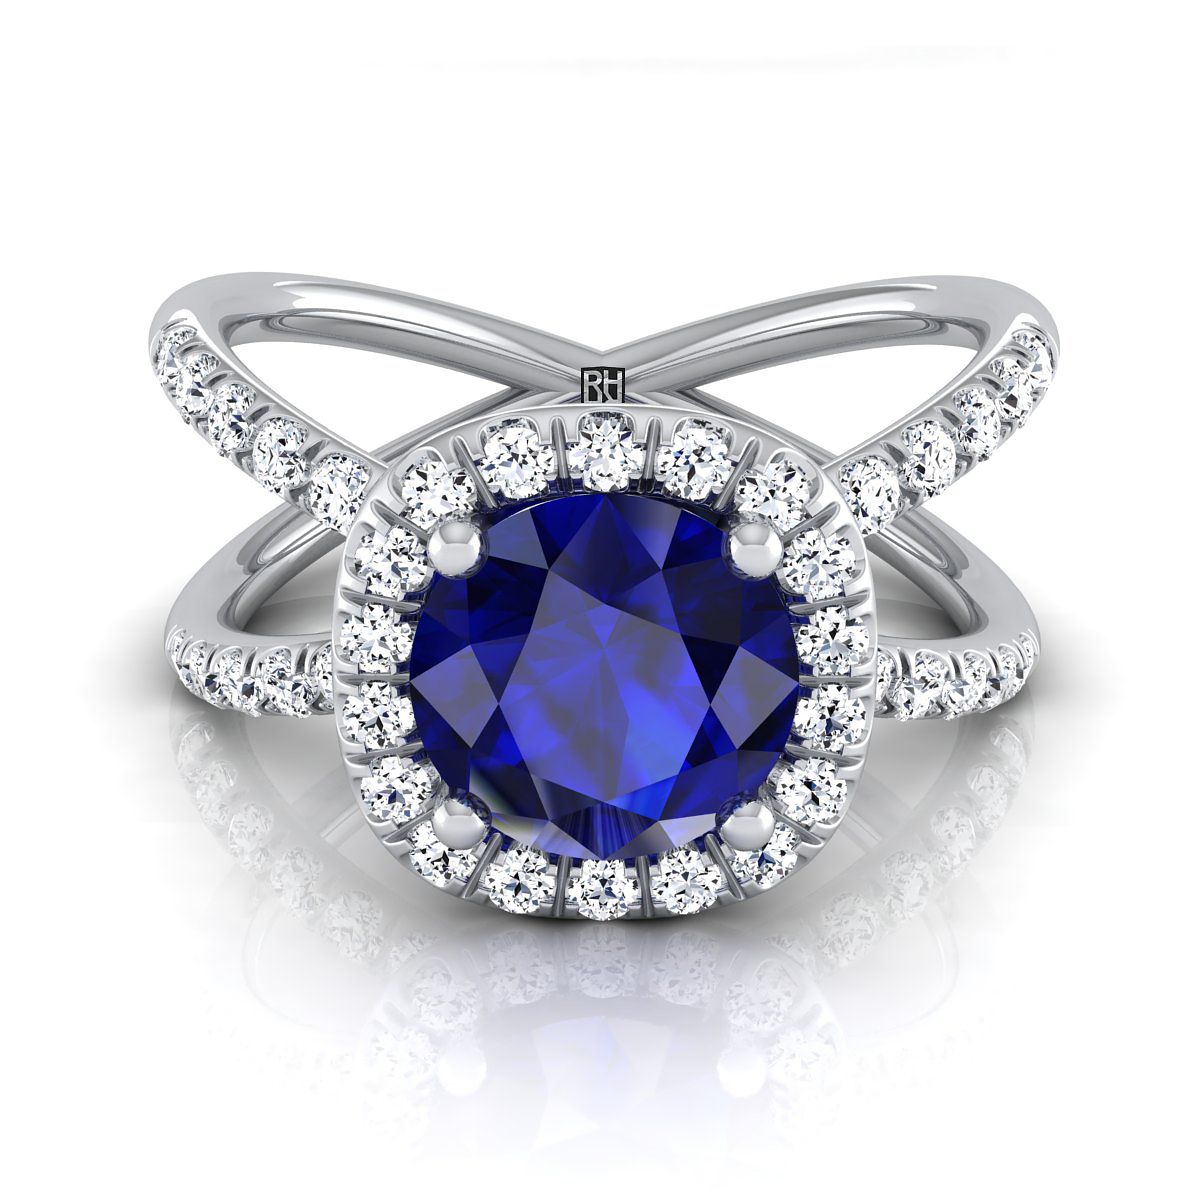 14K White Gold Round Brilliant Sapphire Open Criss Cross French Pave Diamond Engagement Ring -1/2ctw